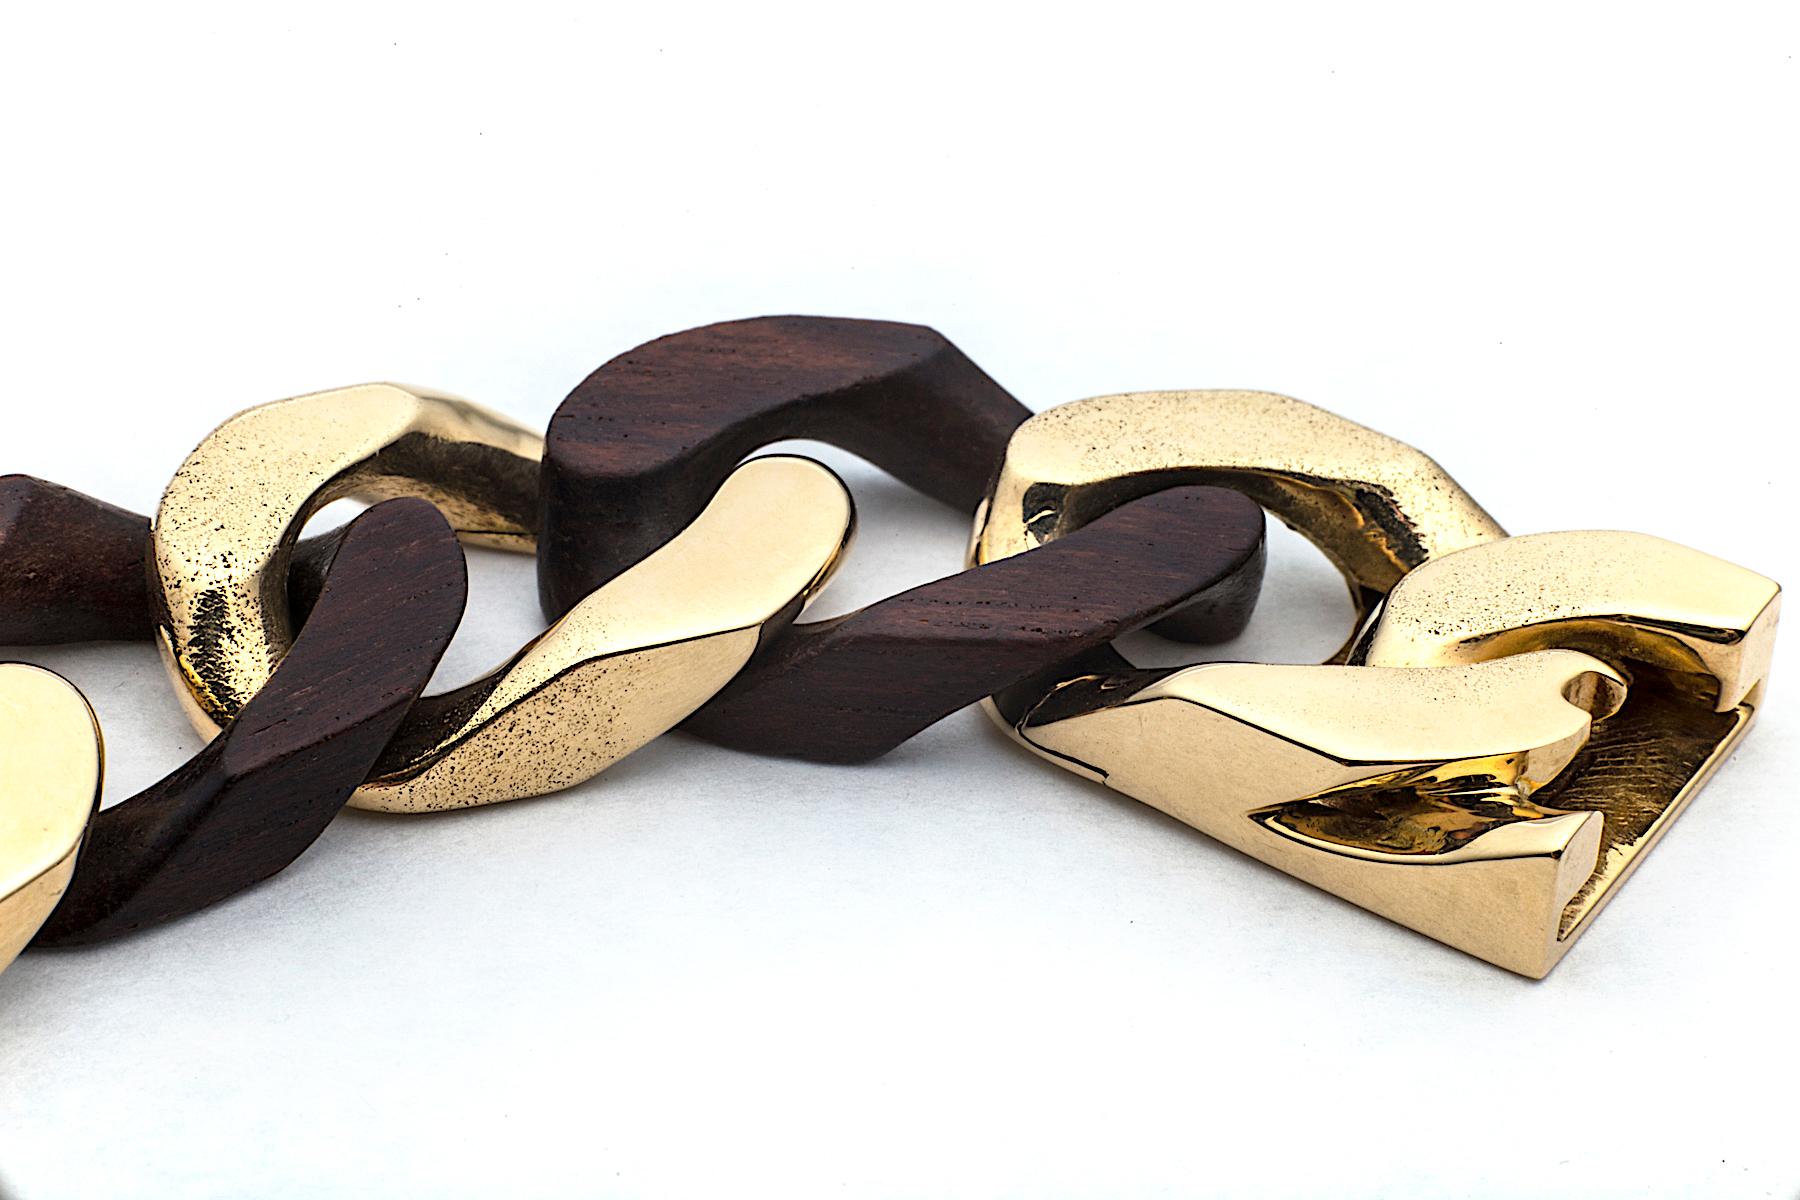 Contemporary Van Cleef & Arpels 1970s Gold and Wood Curb Link Bracelet